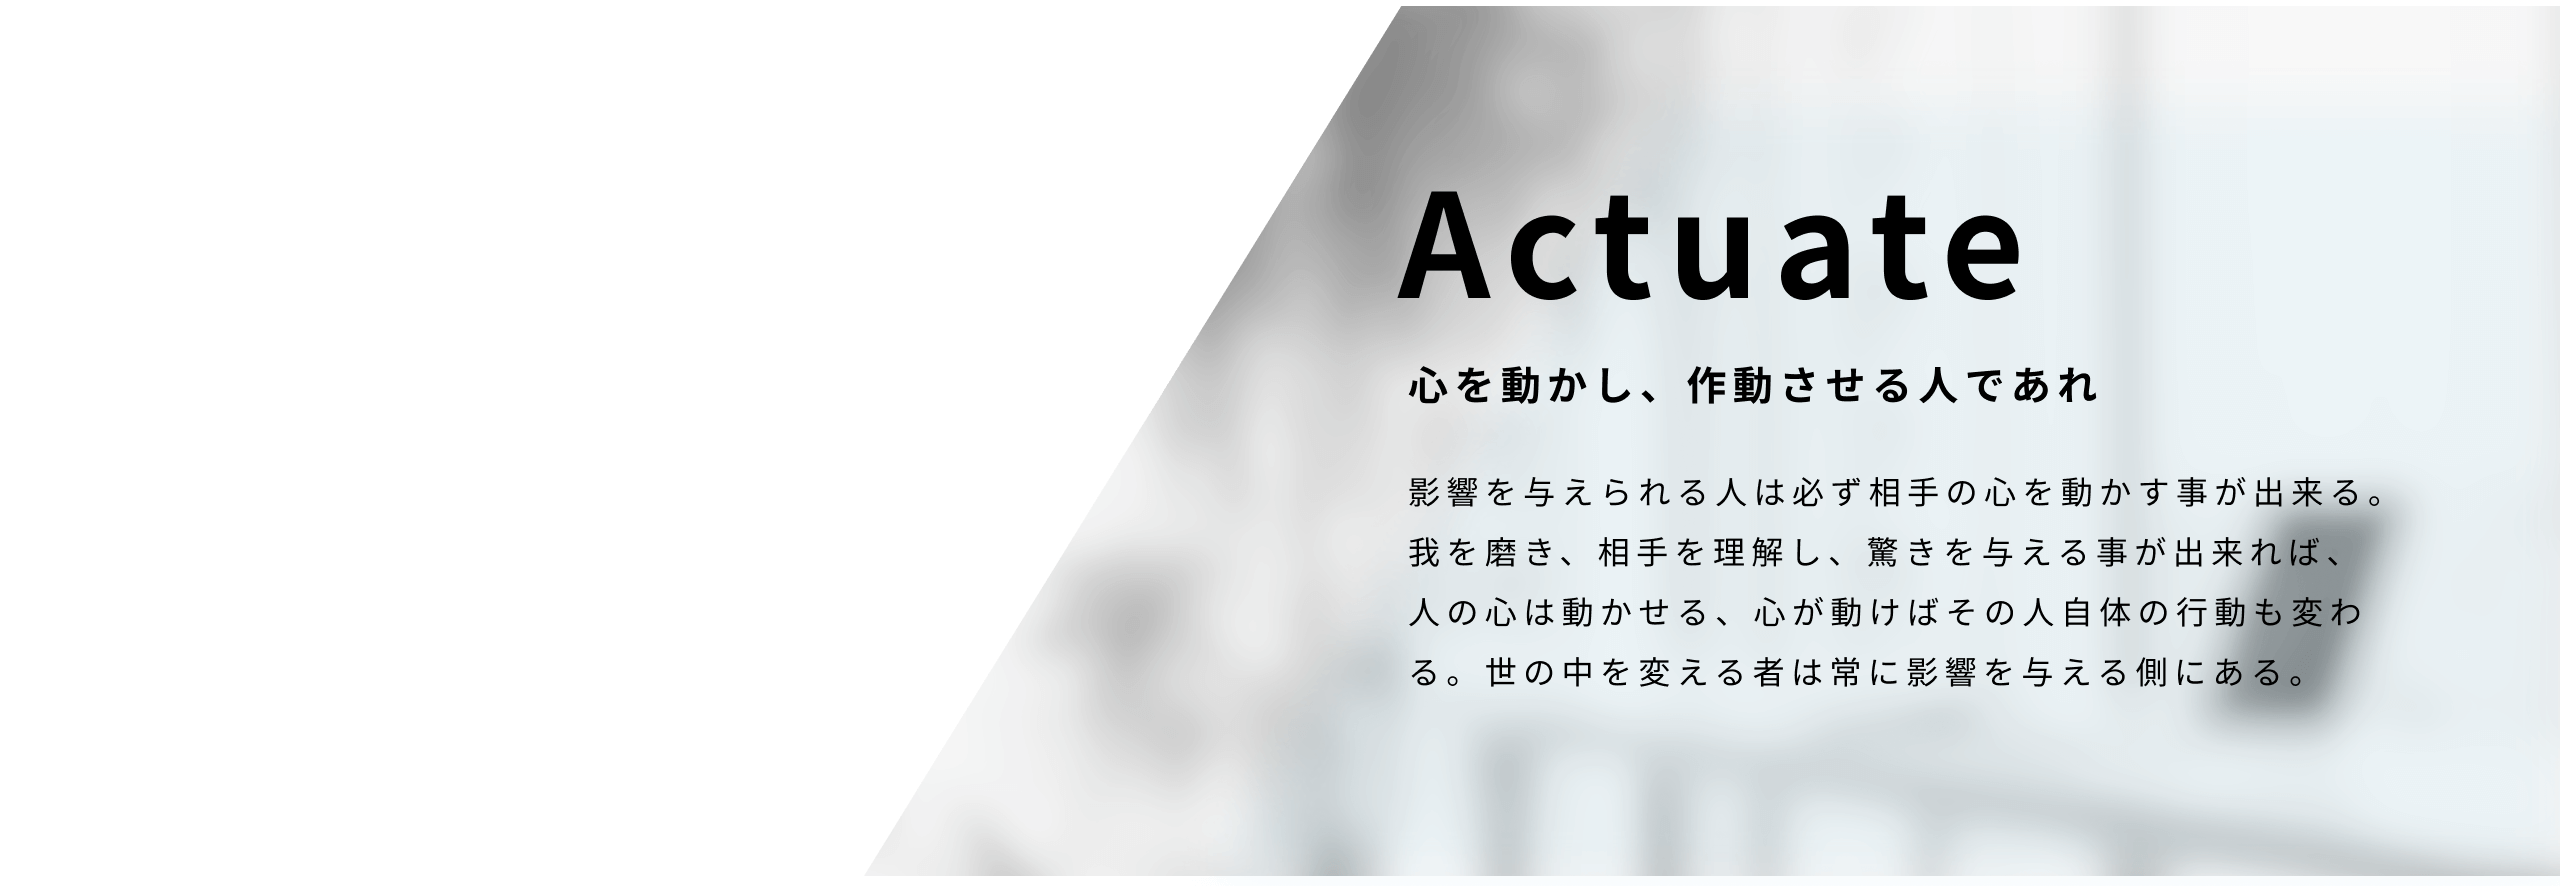 actuate-background-image